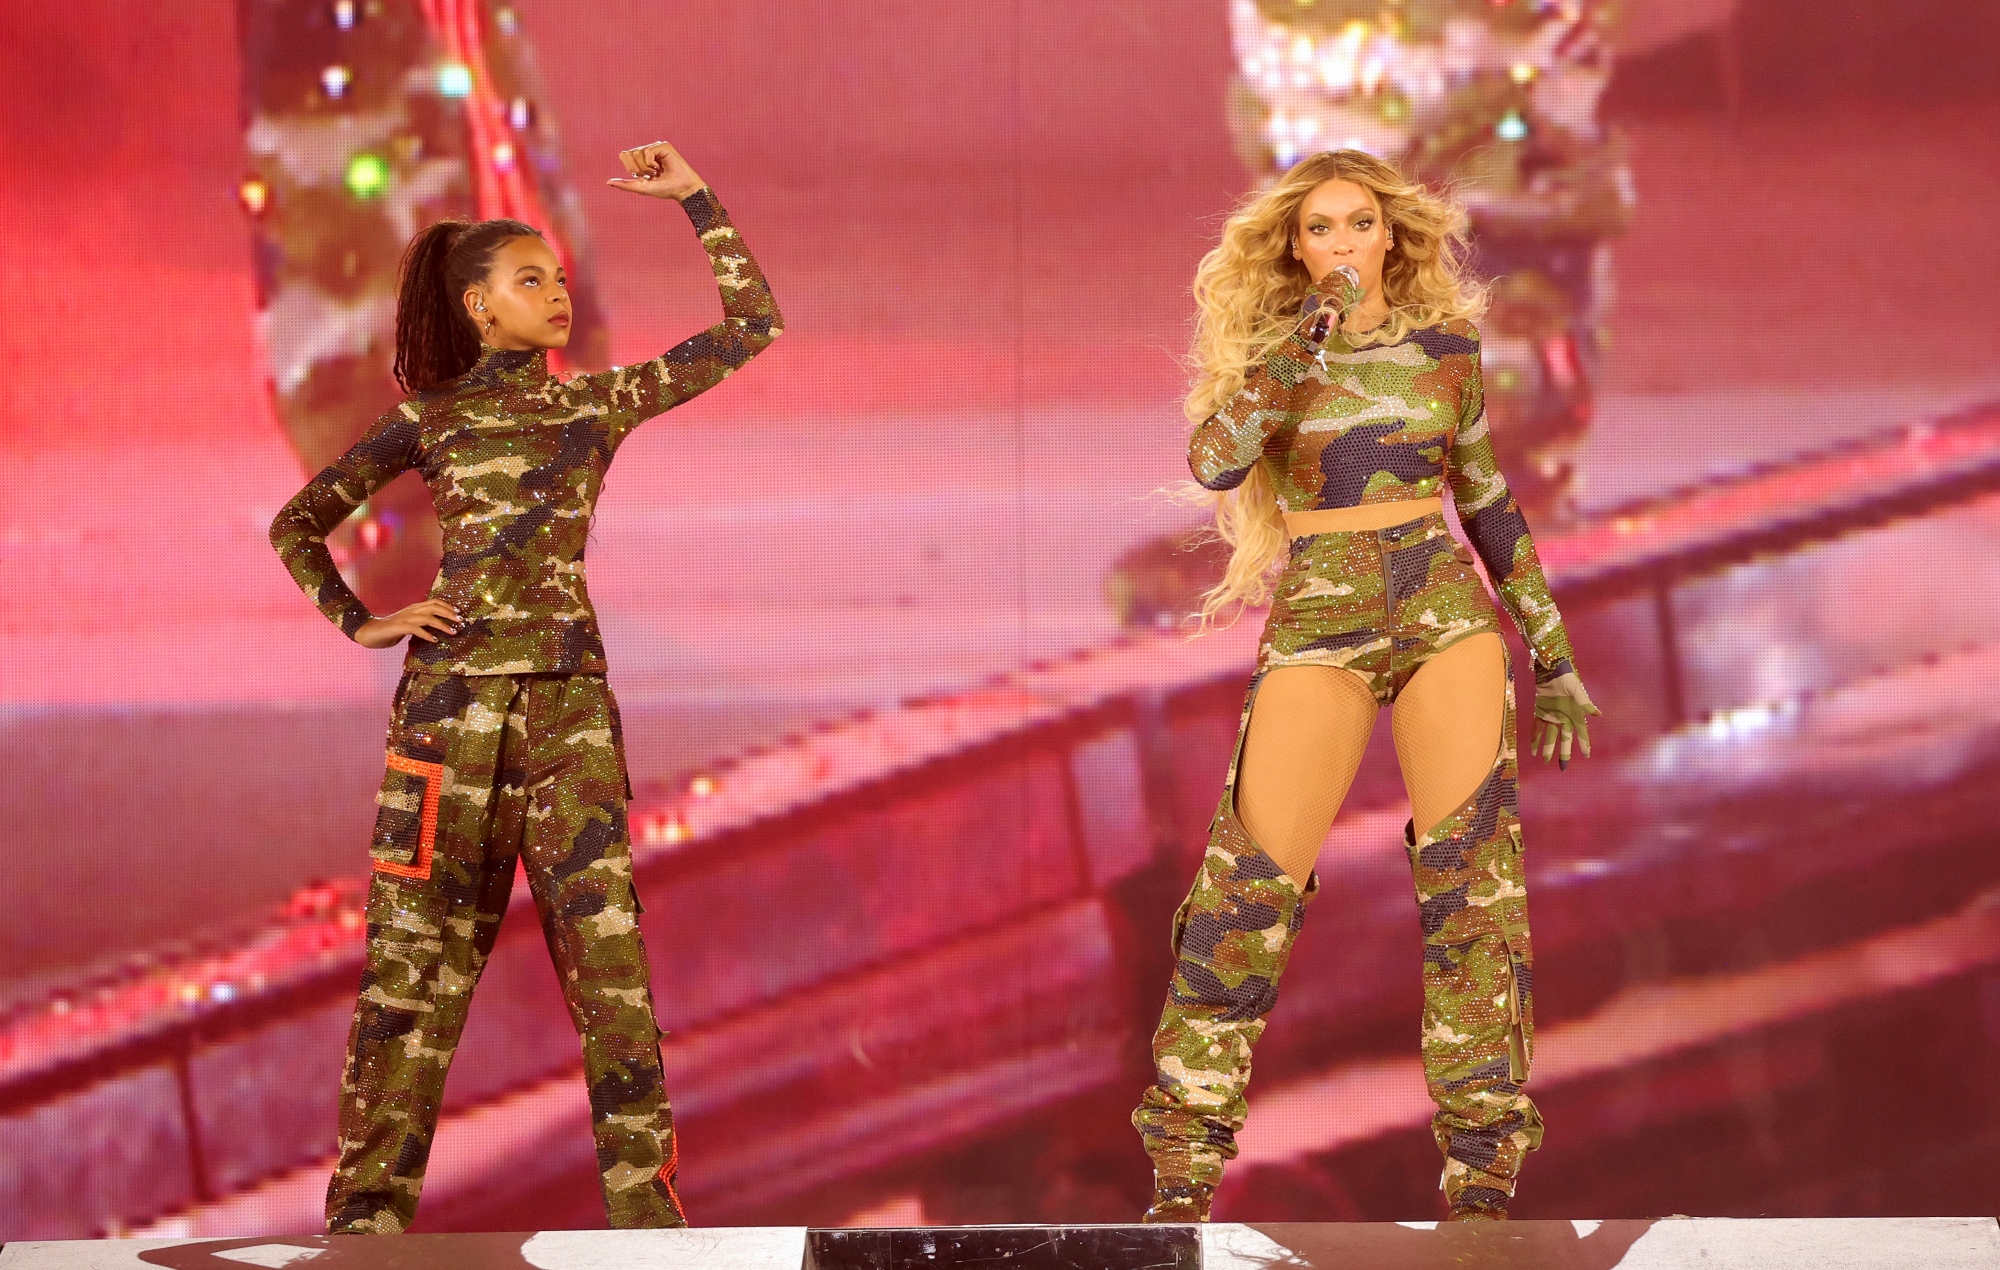 Beyoncé’s daughter Blue Ivy was only supposed to come out for one ‘Renaissance’ tour show